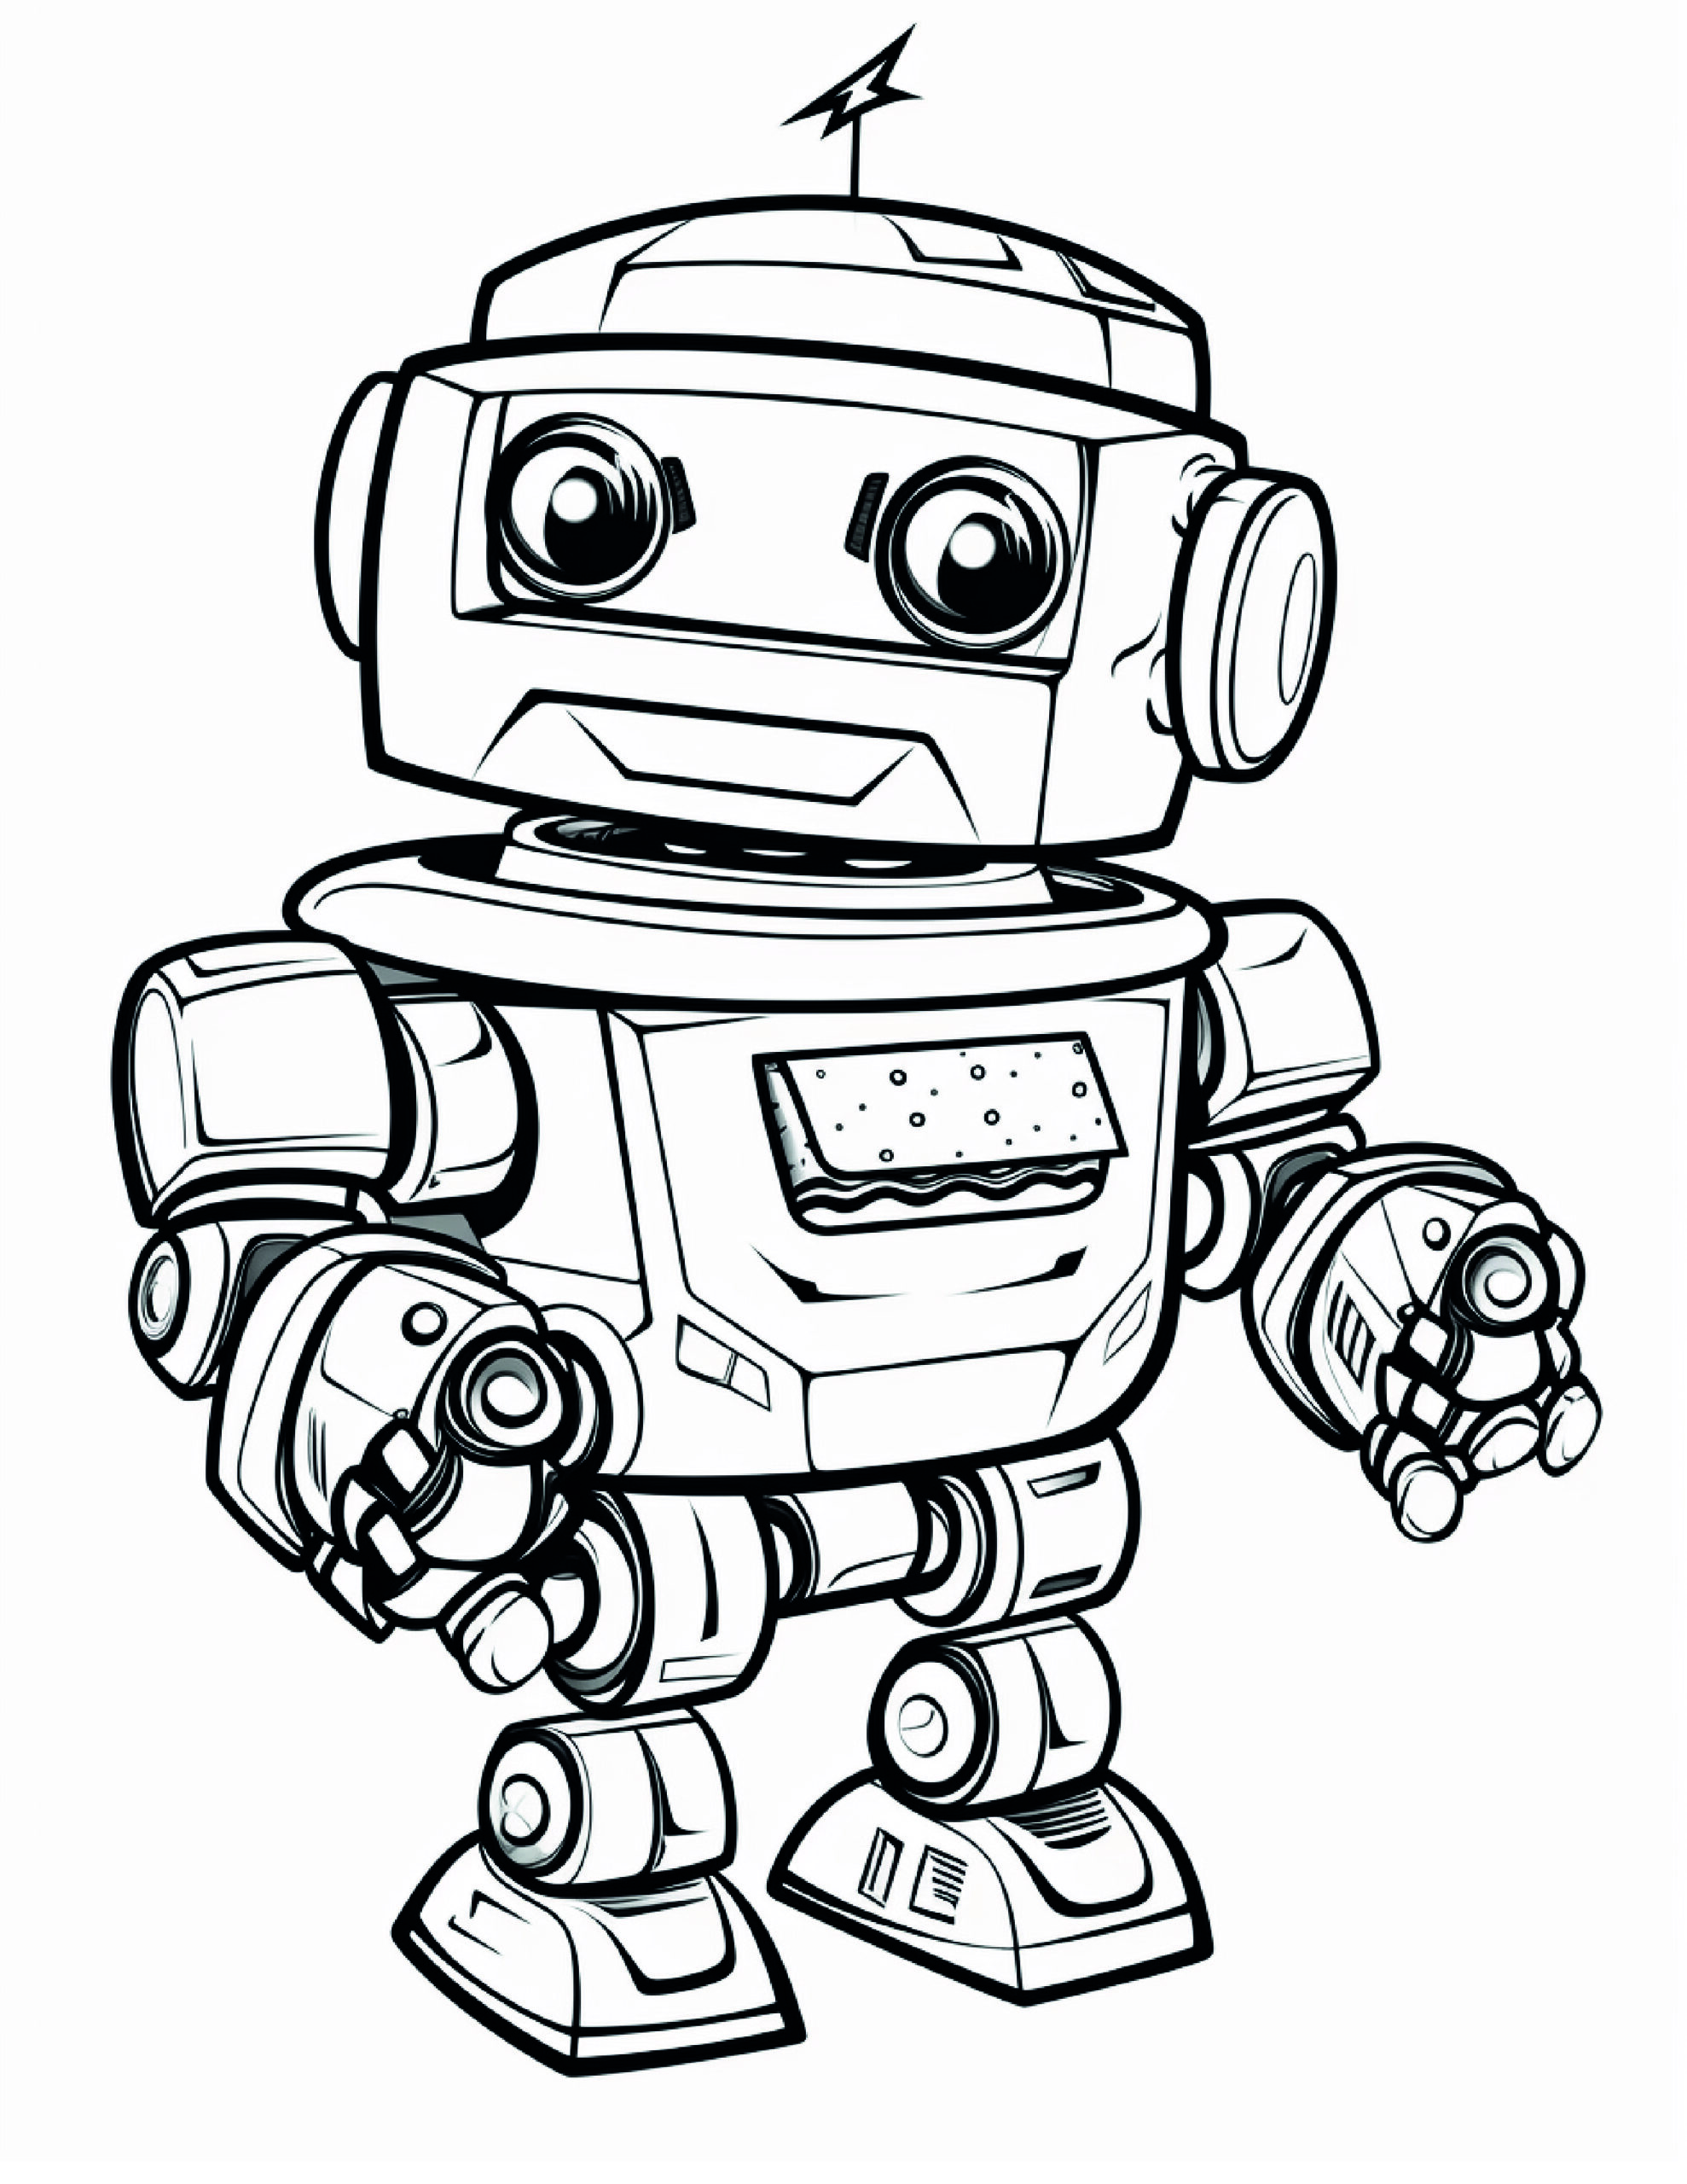 Robot Coloring Page 10 - A line drawing of an angry robot. 